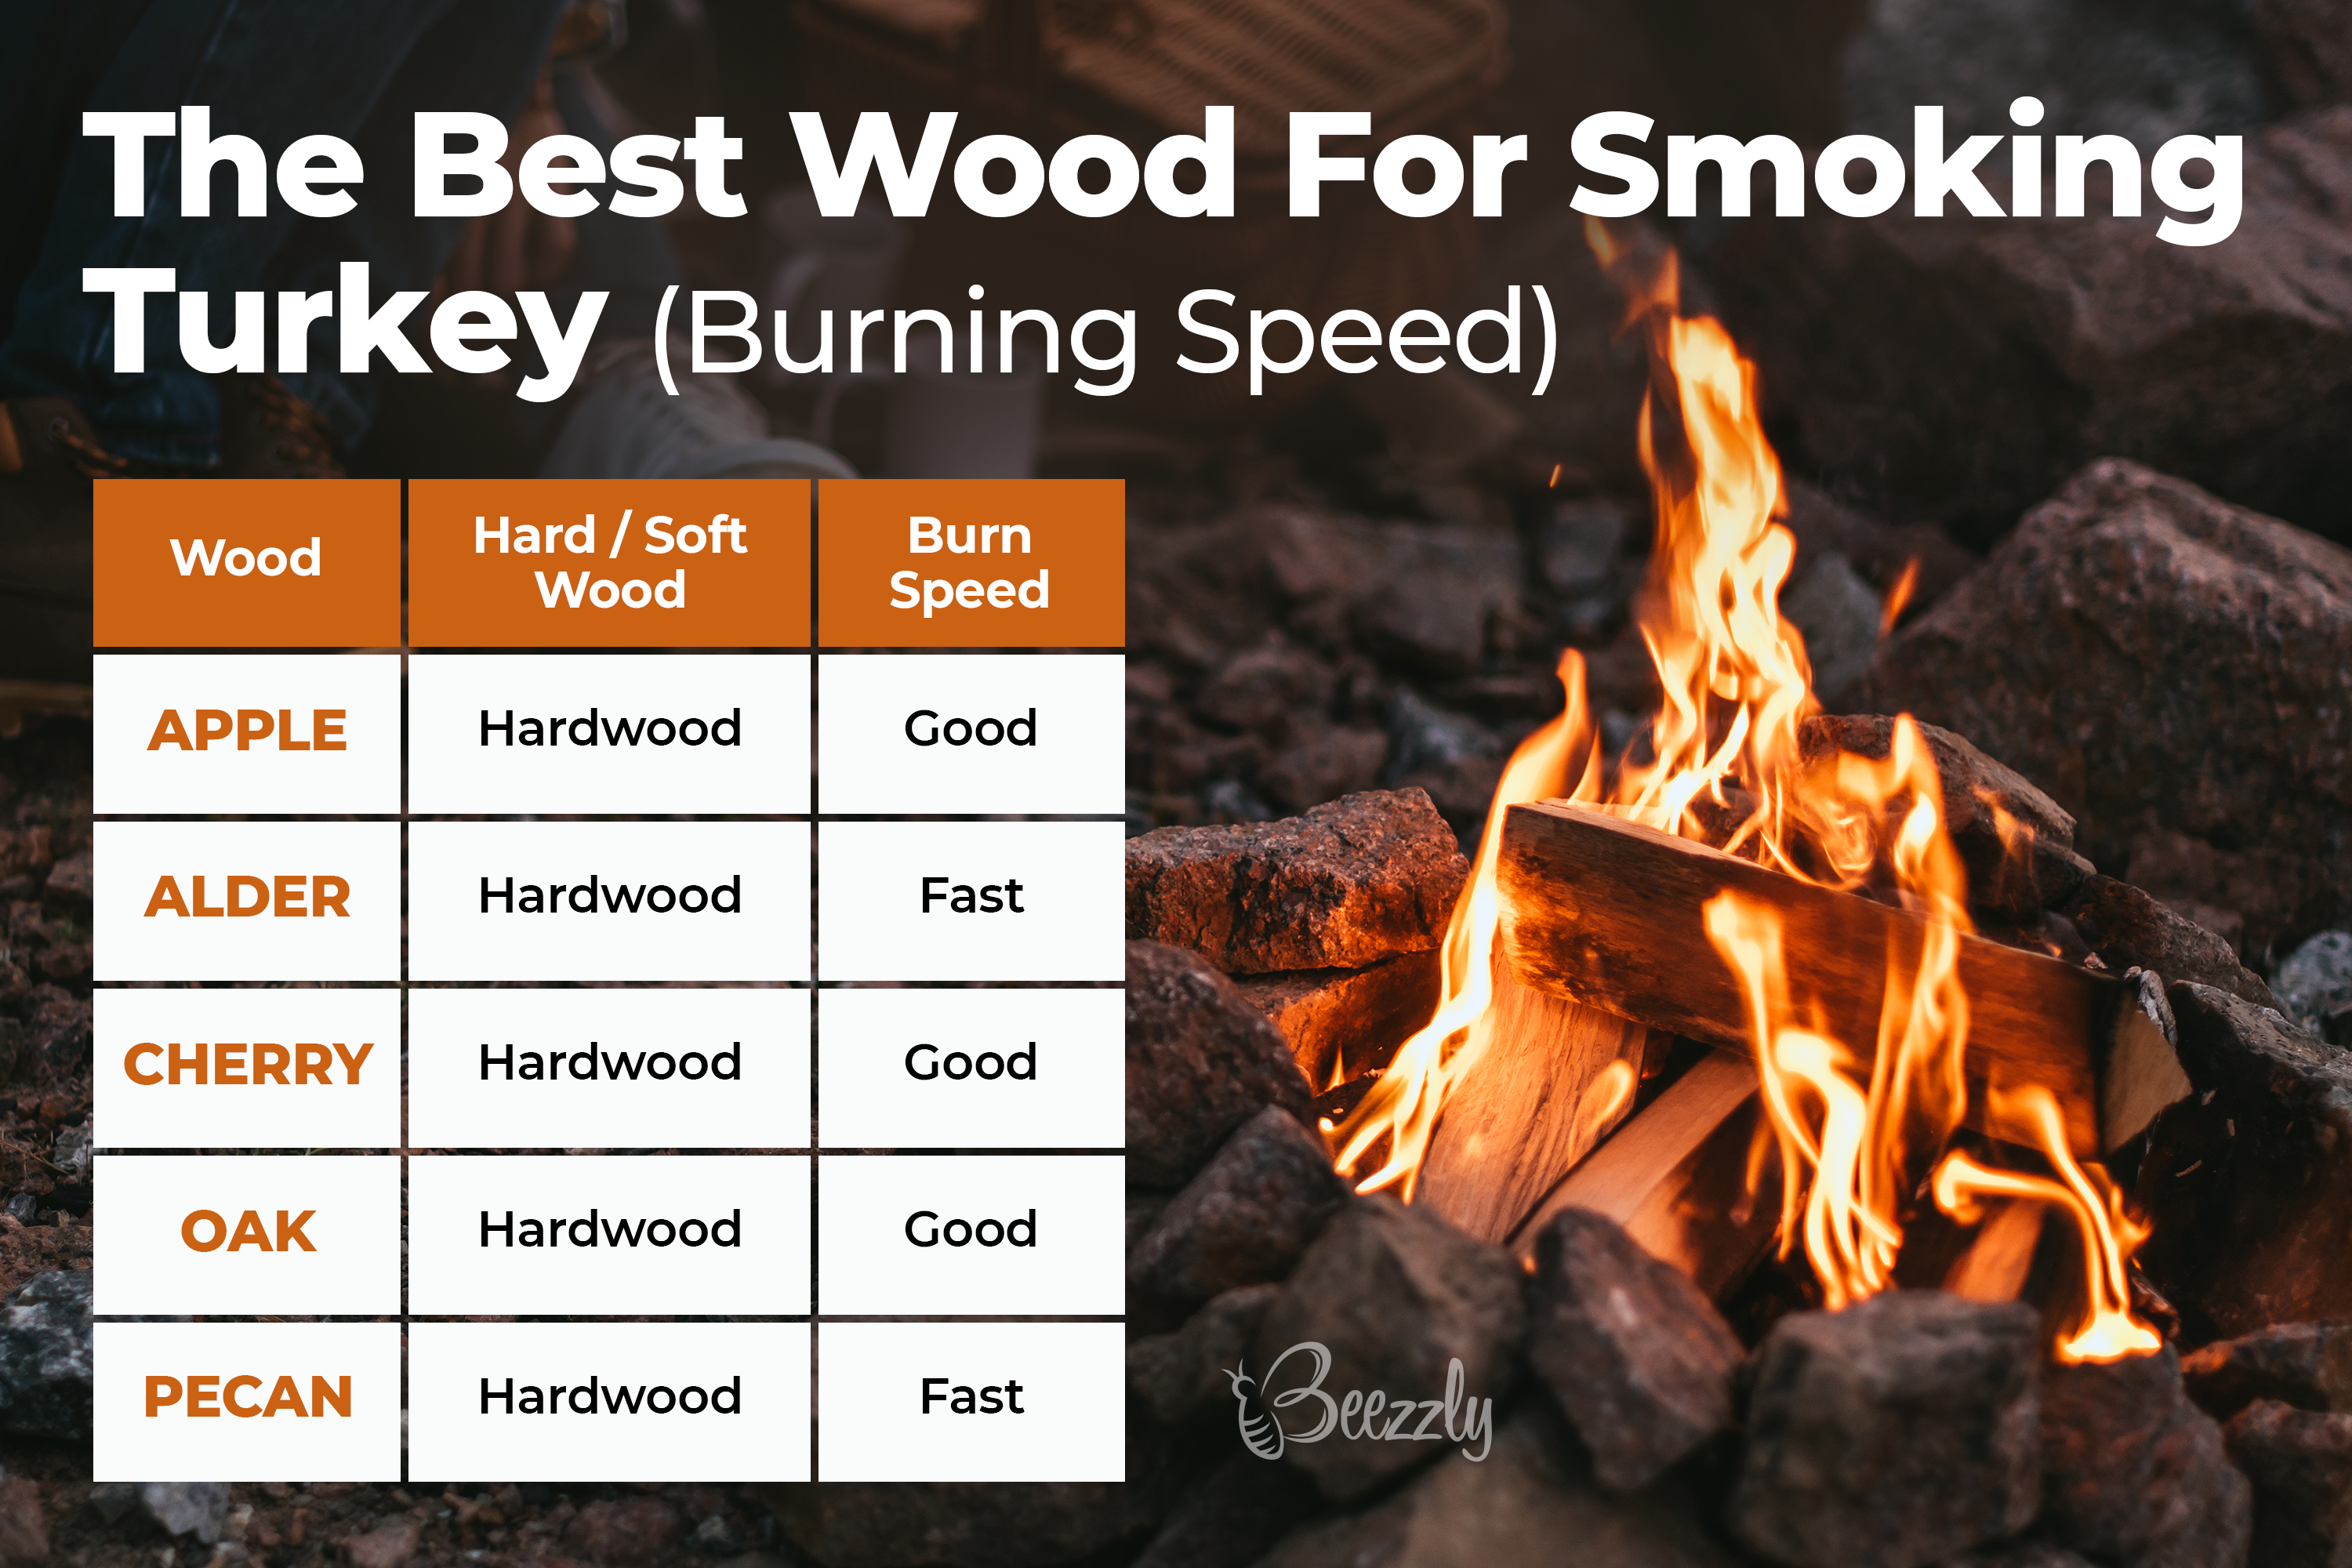 What is the Best Wood For Smoking Turkey